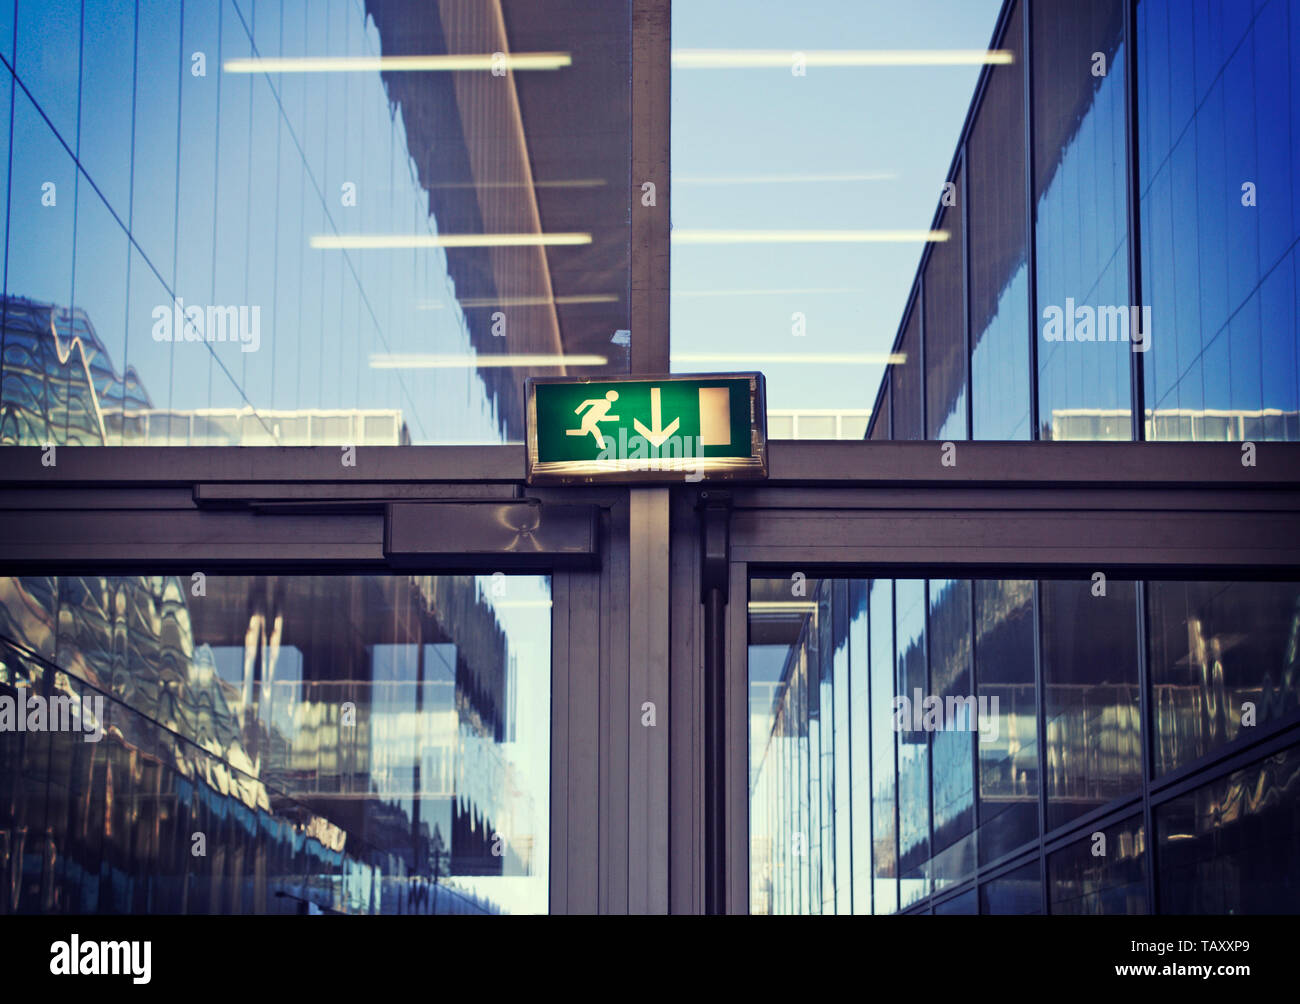 emergency exit sign inside a modern office building Stock Photo